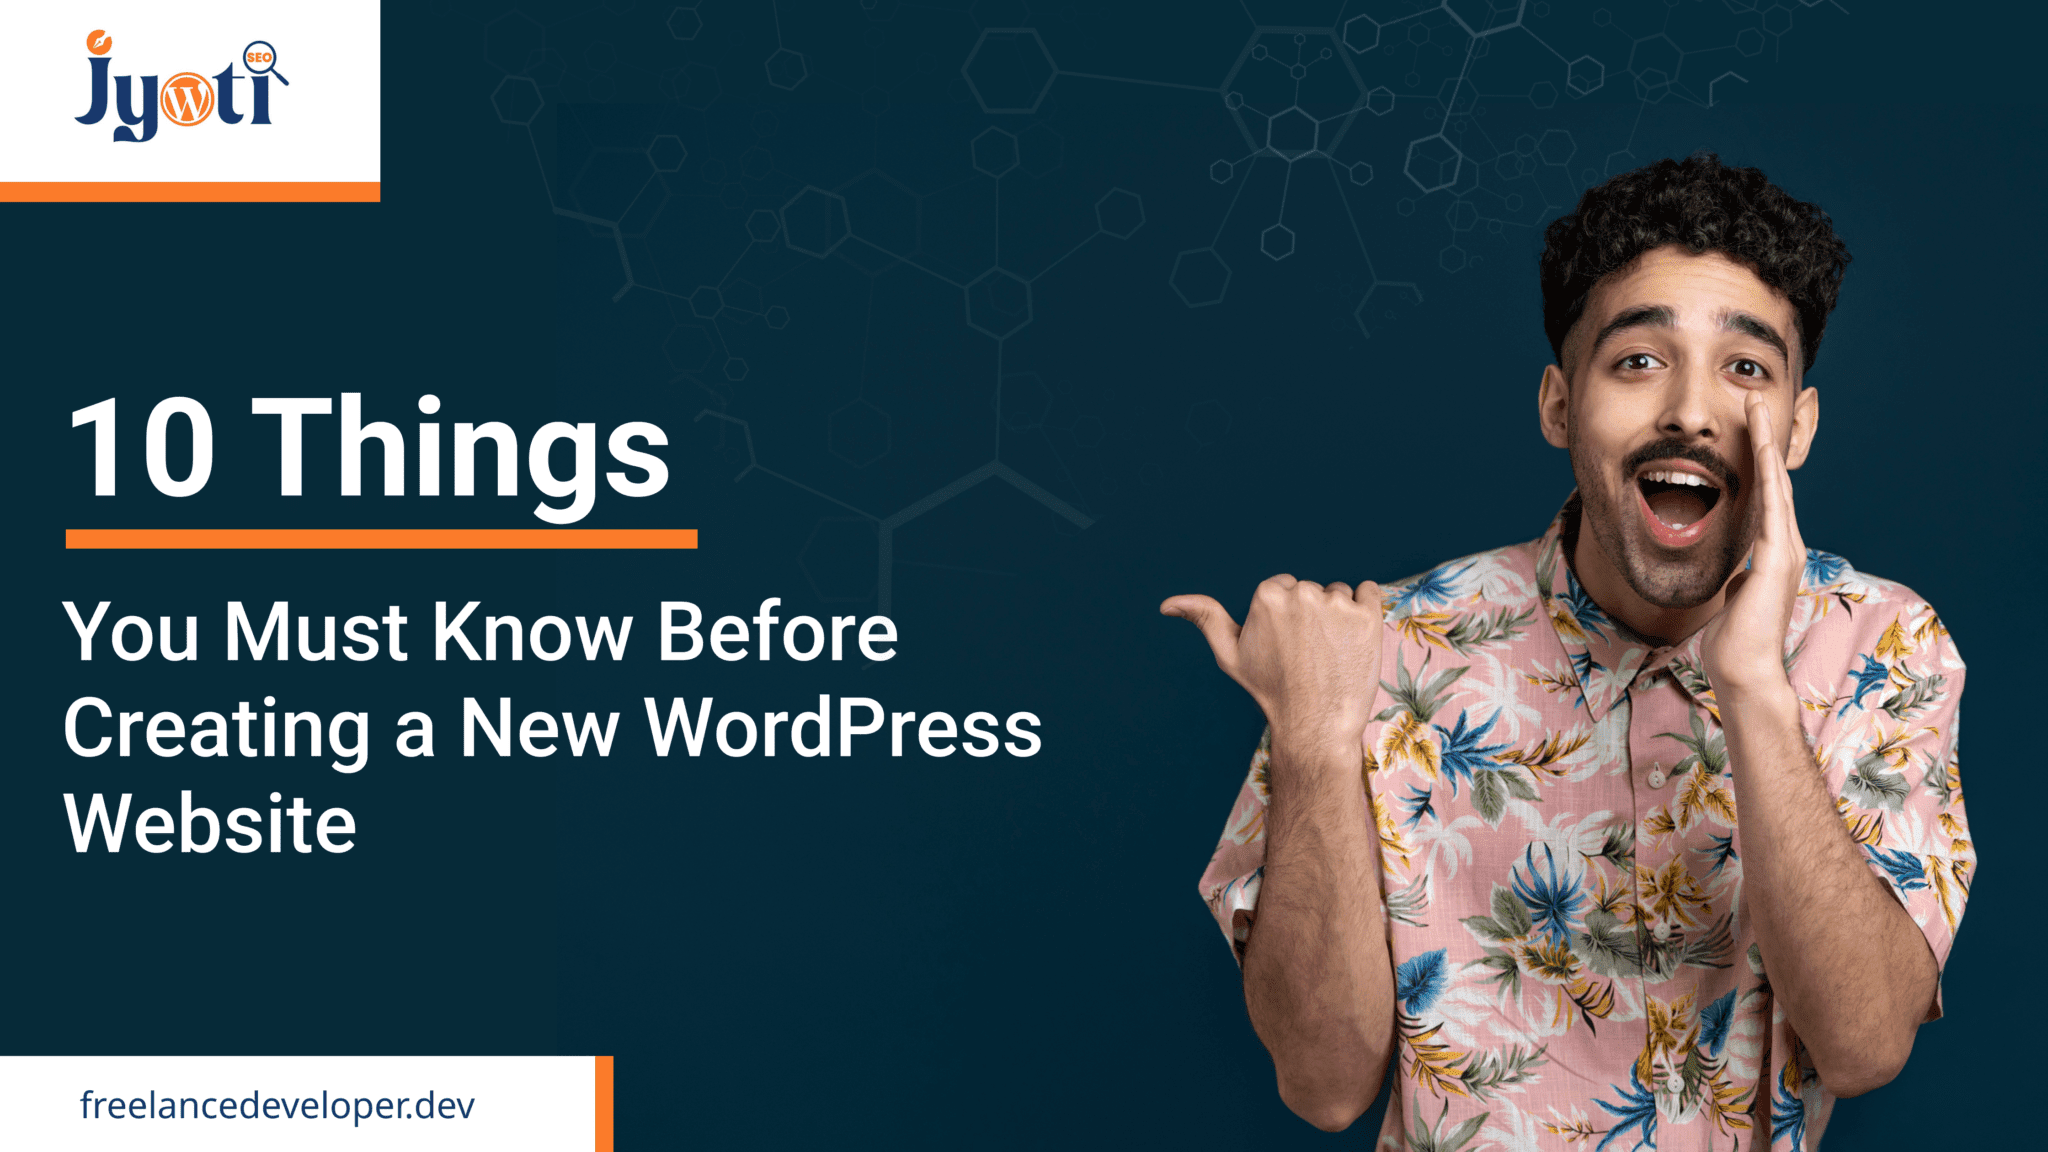 10 Things You Must Know Before Creating a New WordPress Website